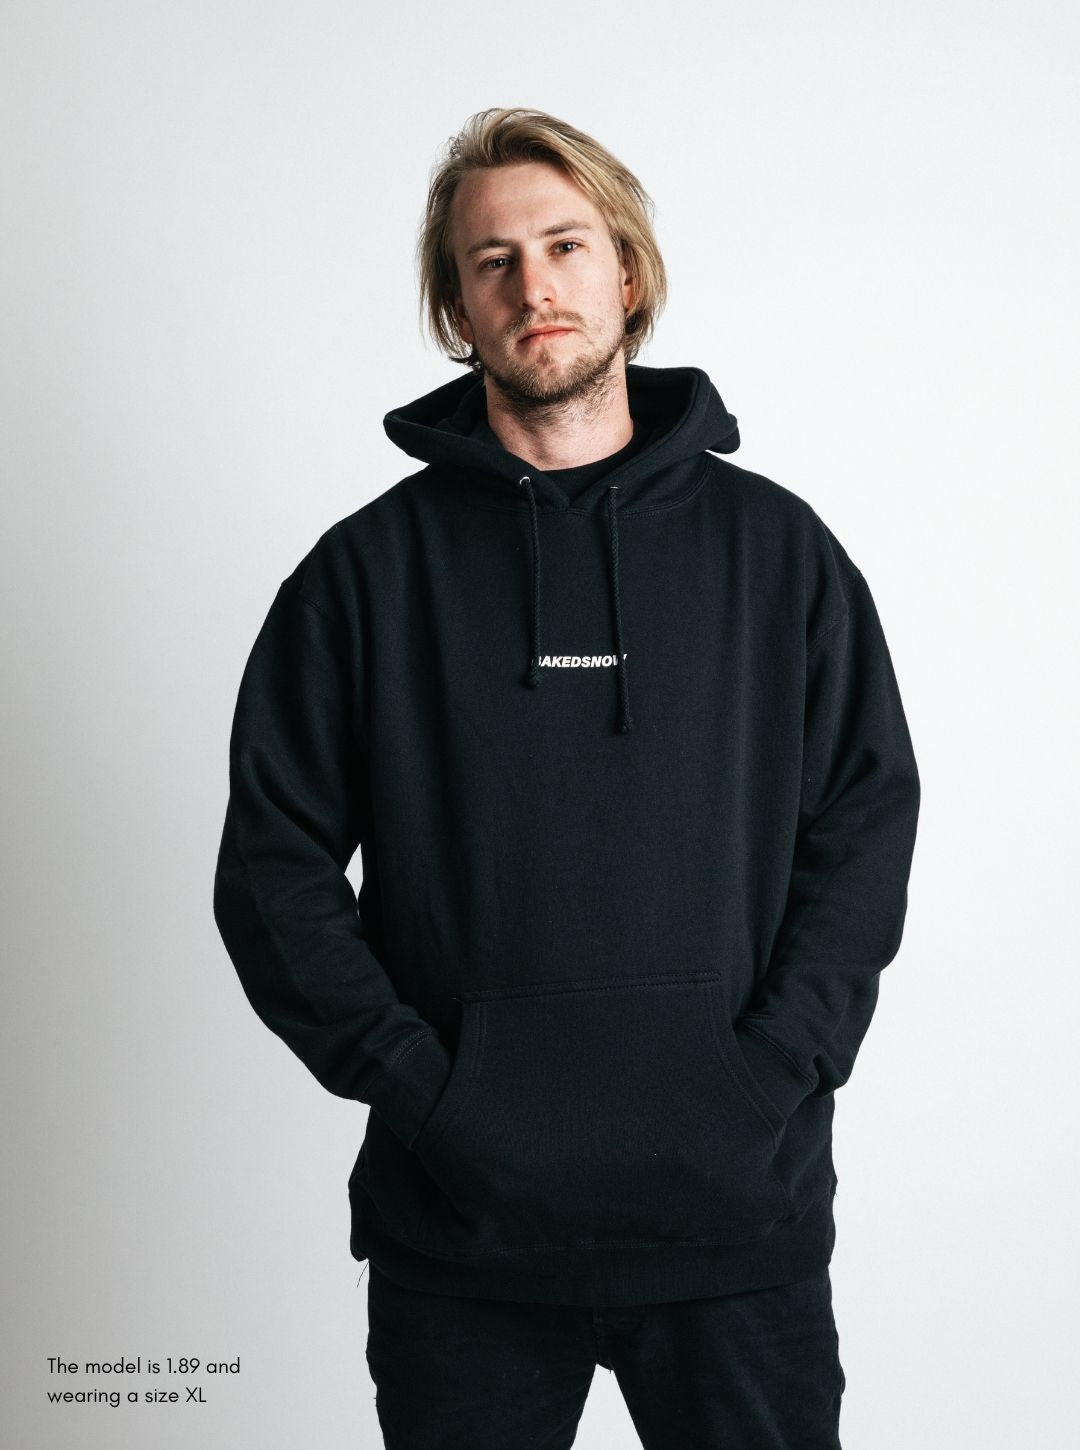 bakedsnow the system snowboard hoodie model shot from the front. Size XL with a model size 1.89